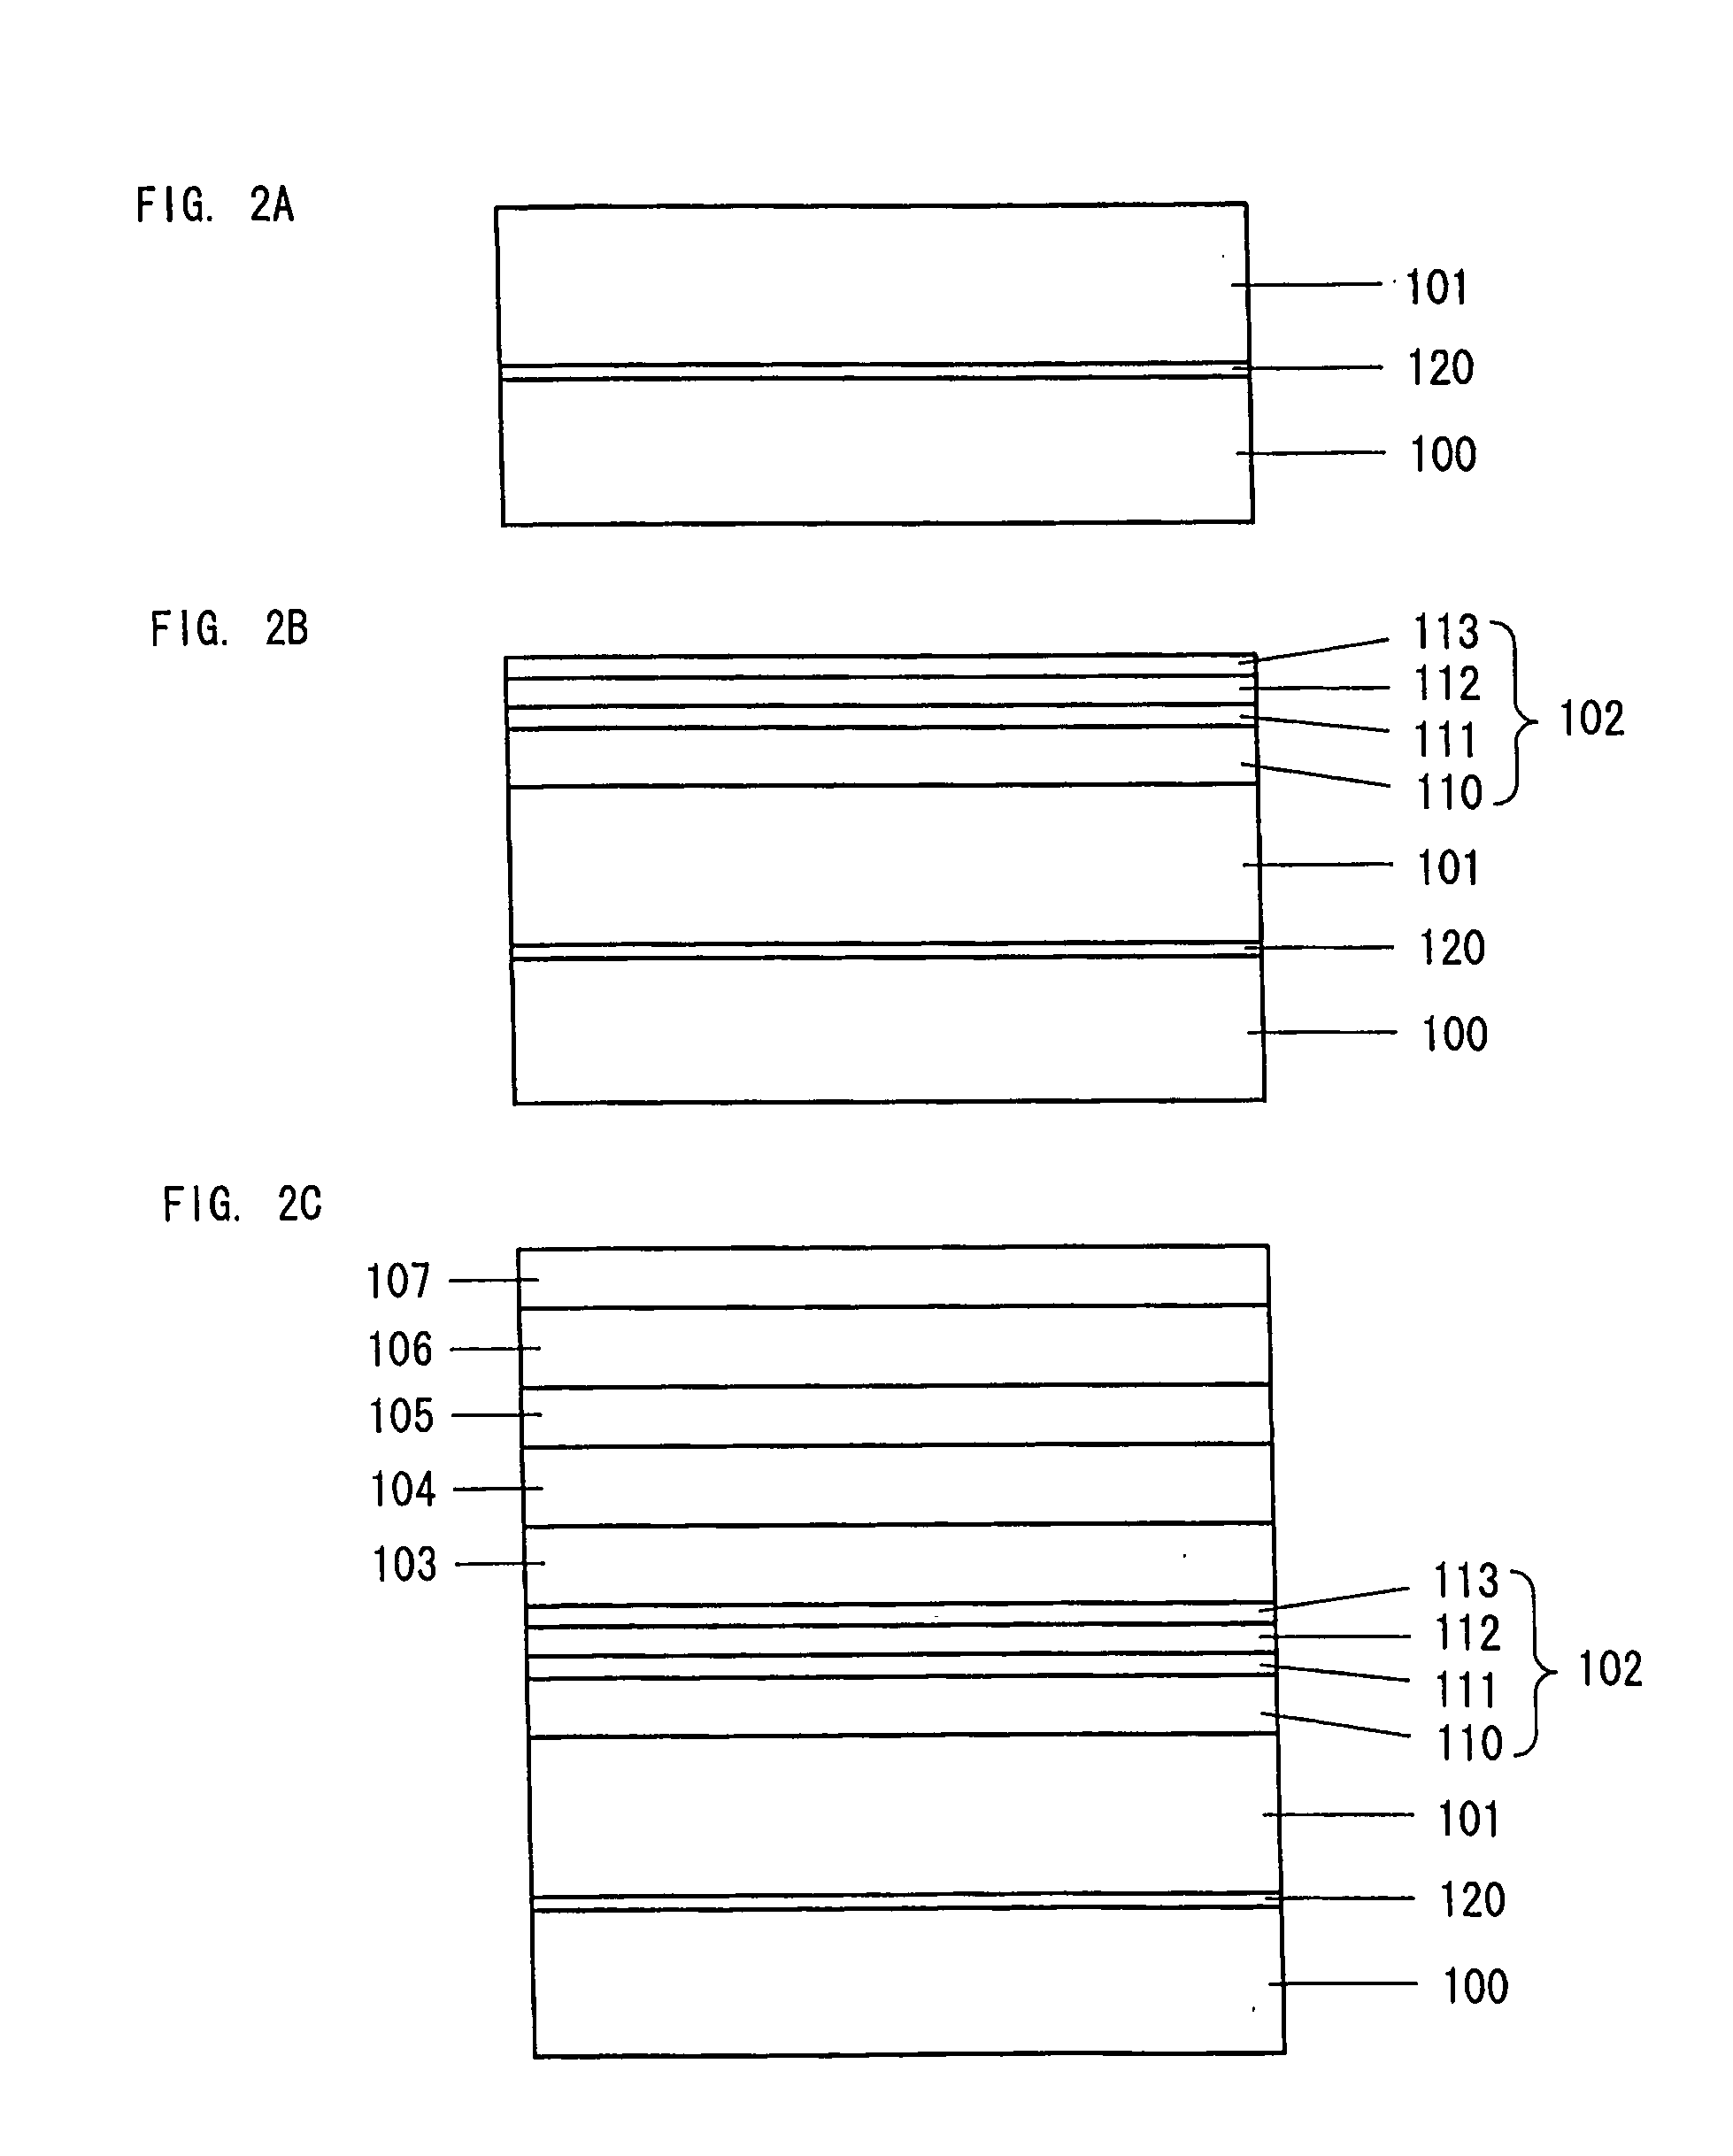 Group lll nitride semiconductor light-emitting device